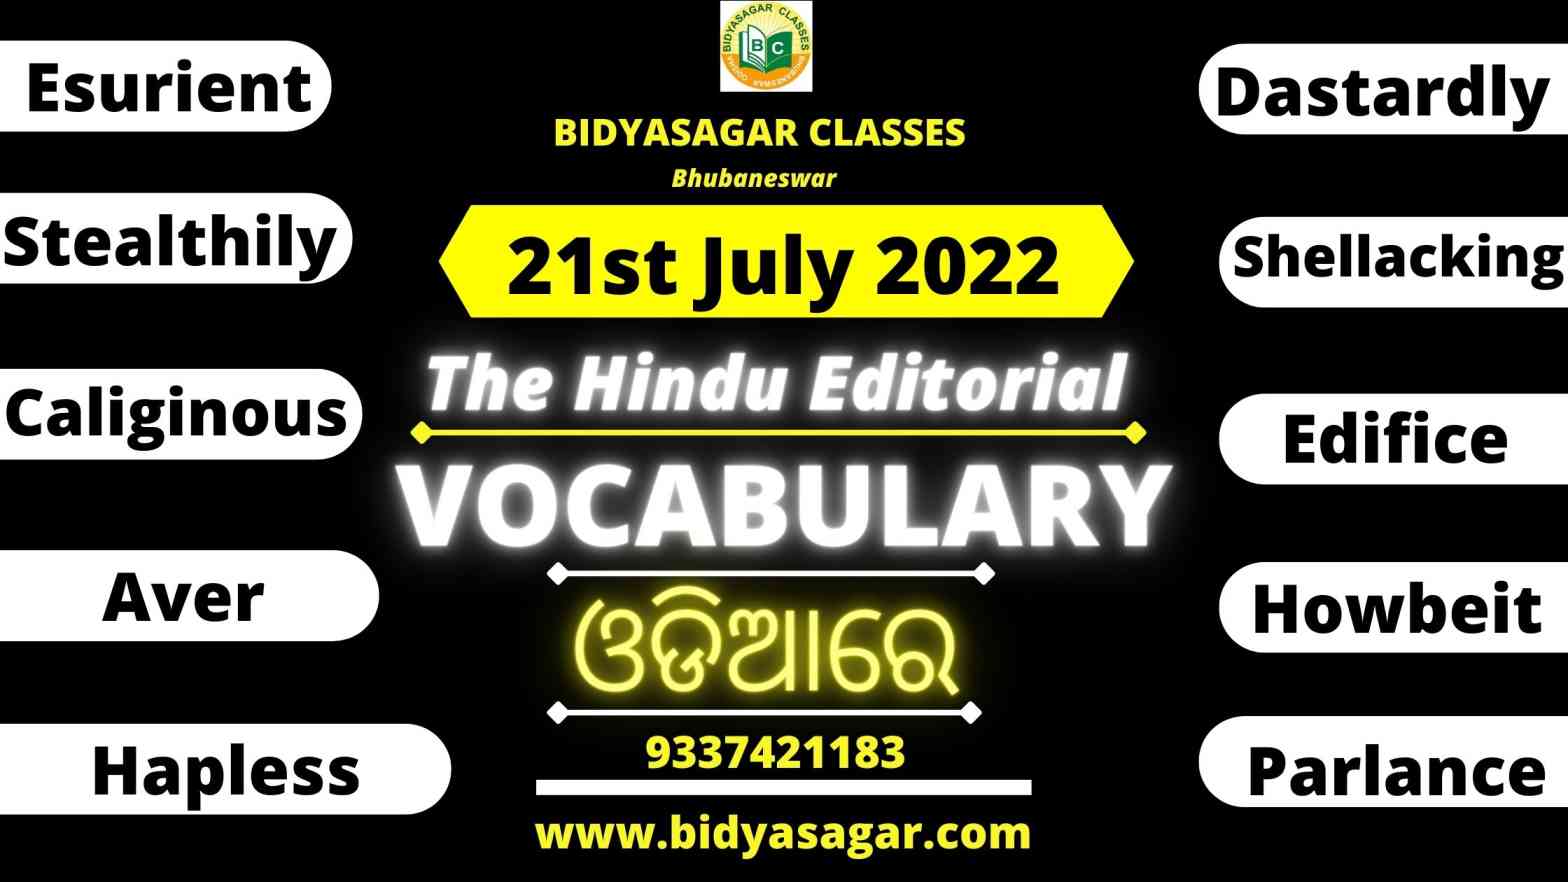 The Hindu Editorial Vocabulary of 21st July 2022